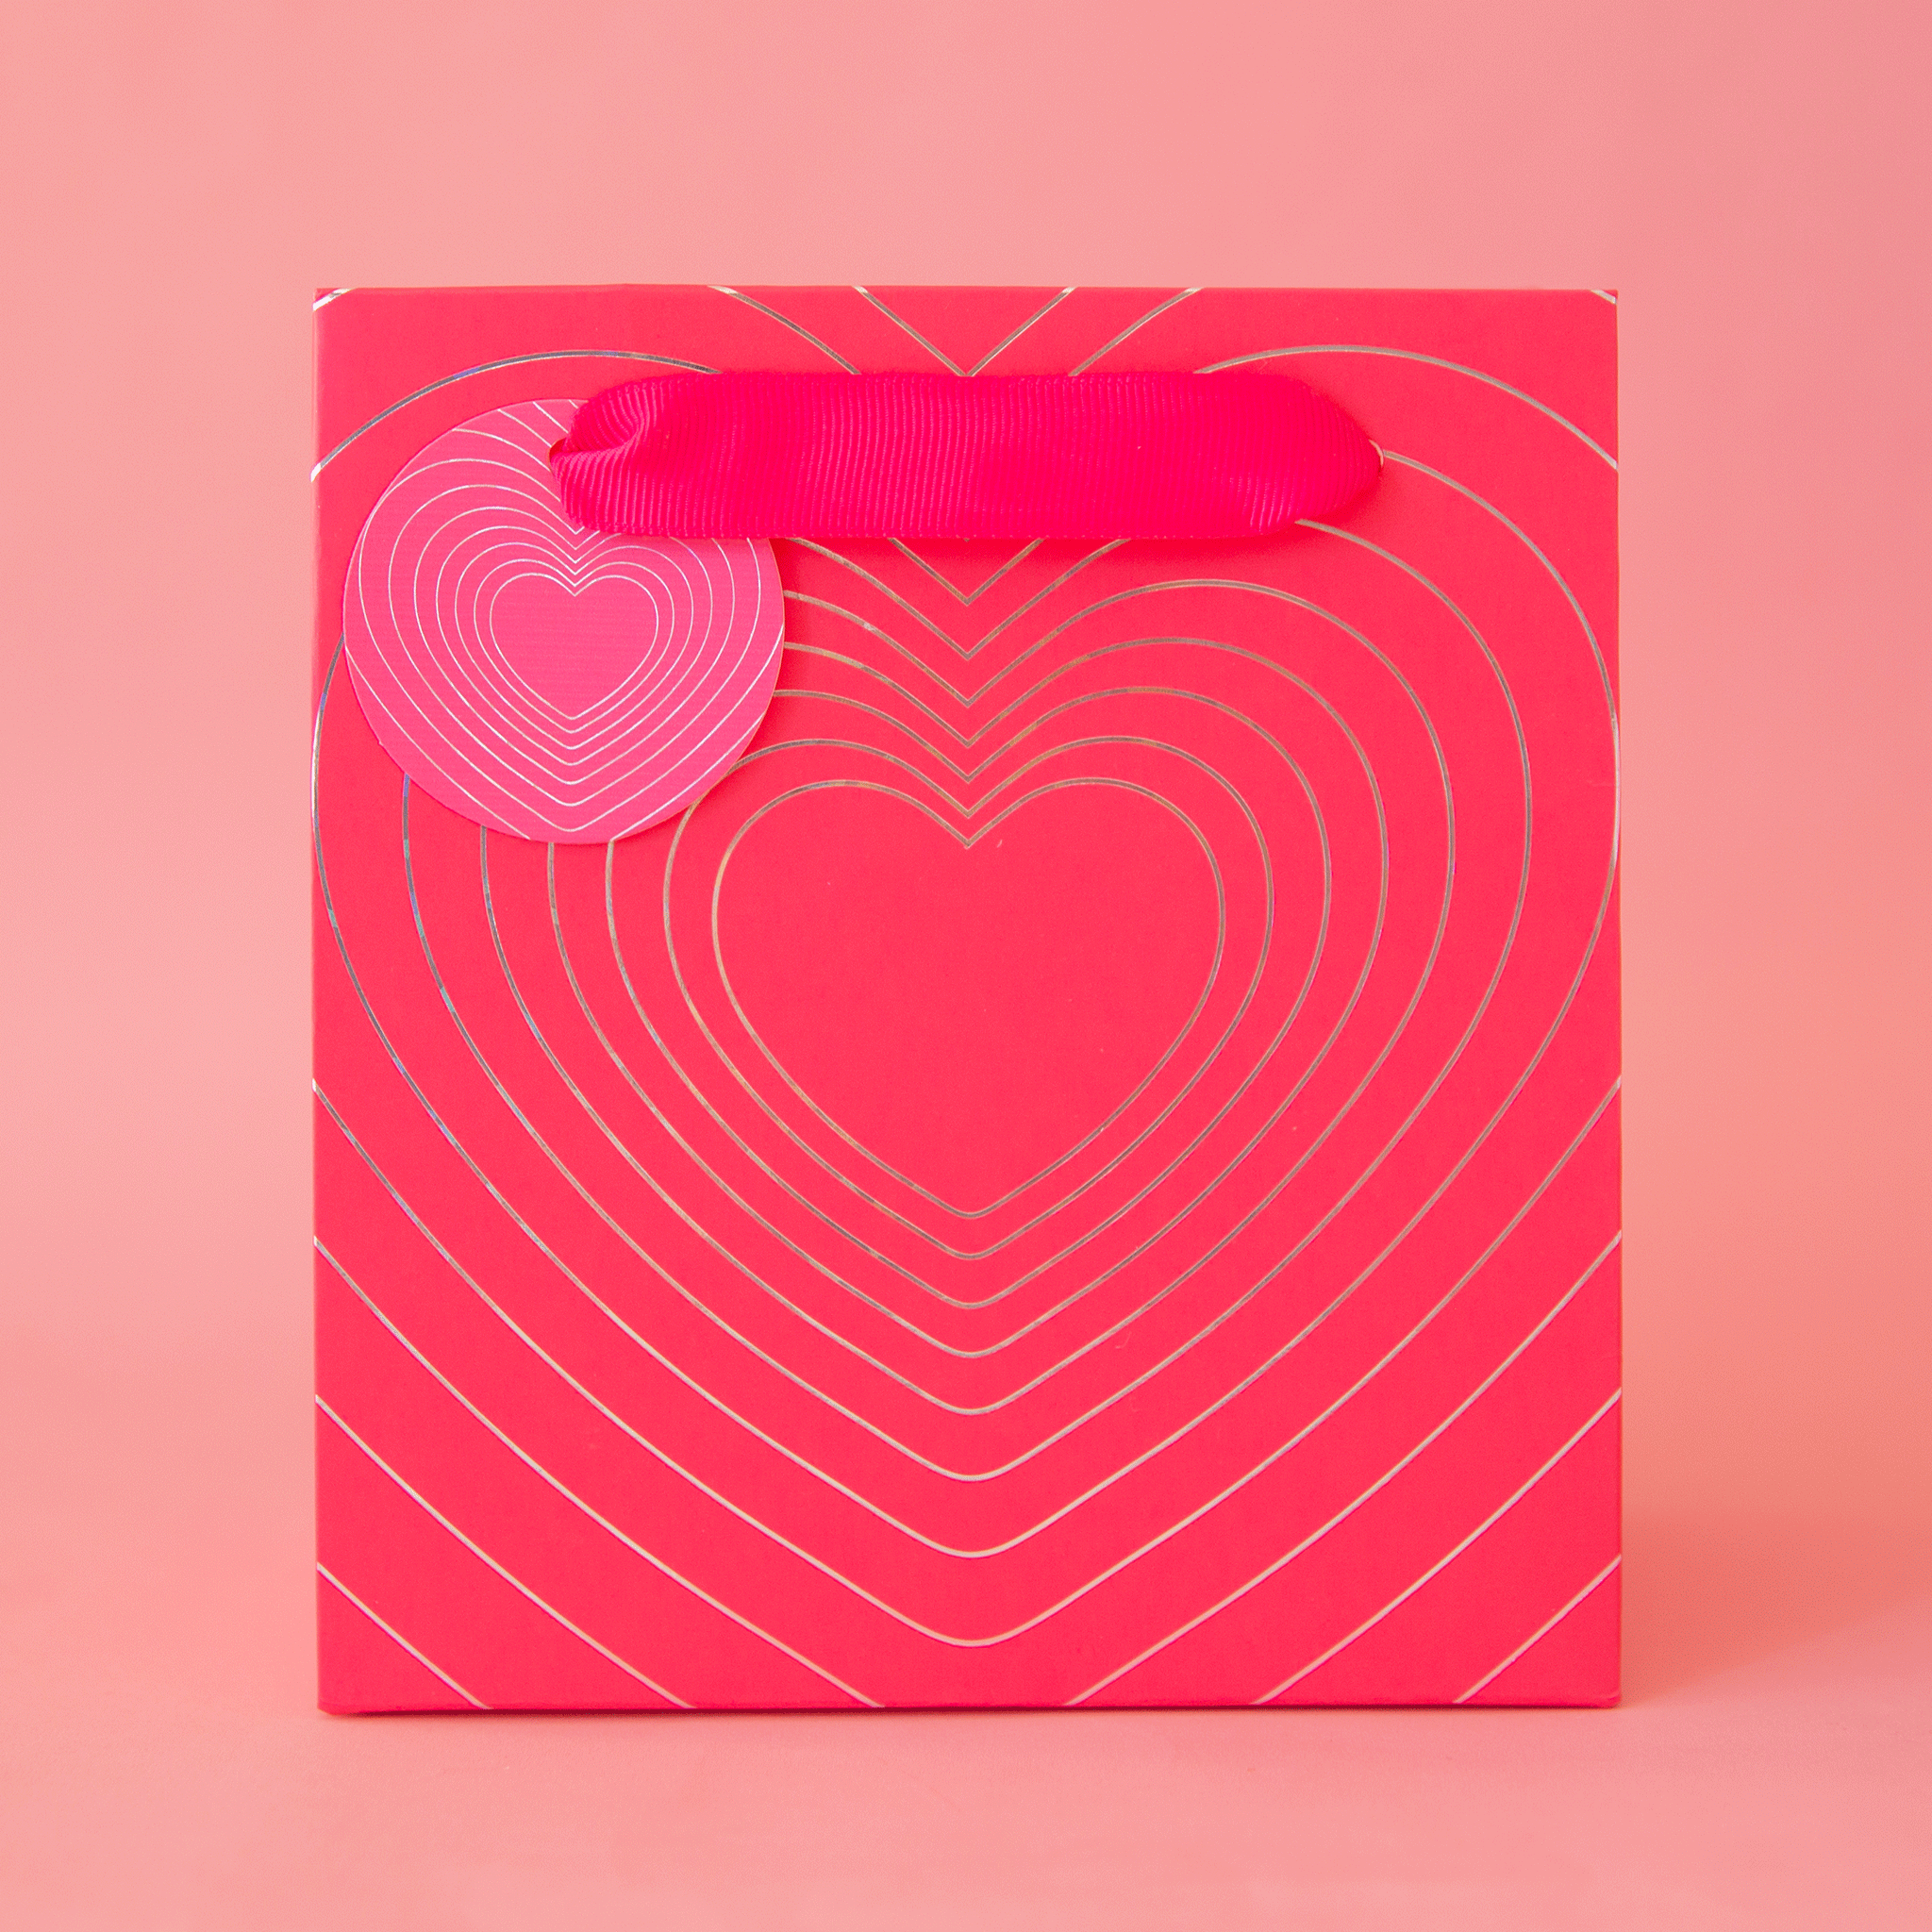 On a pink background is a small gift bag with a radiating heart design and ribbon handles.